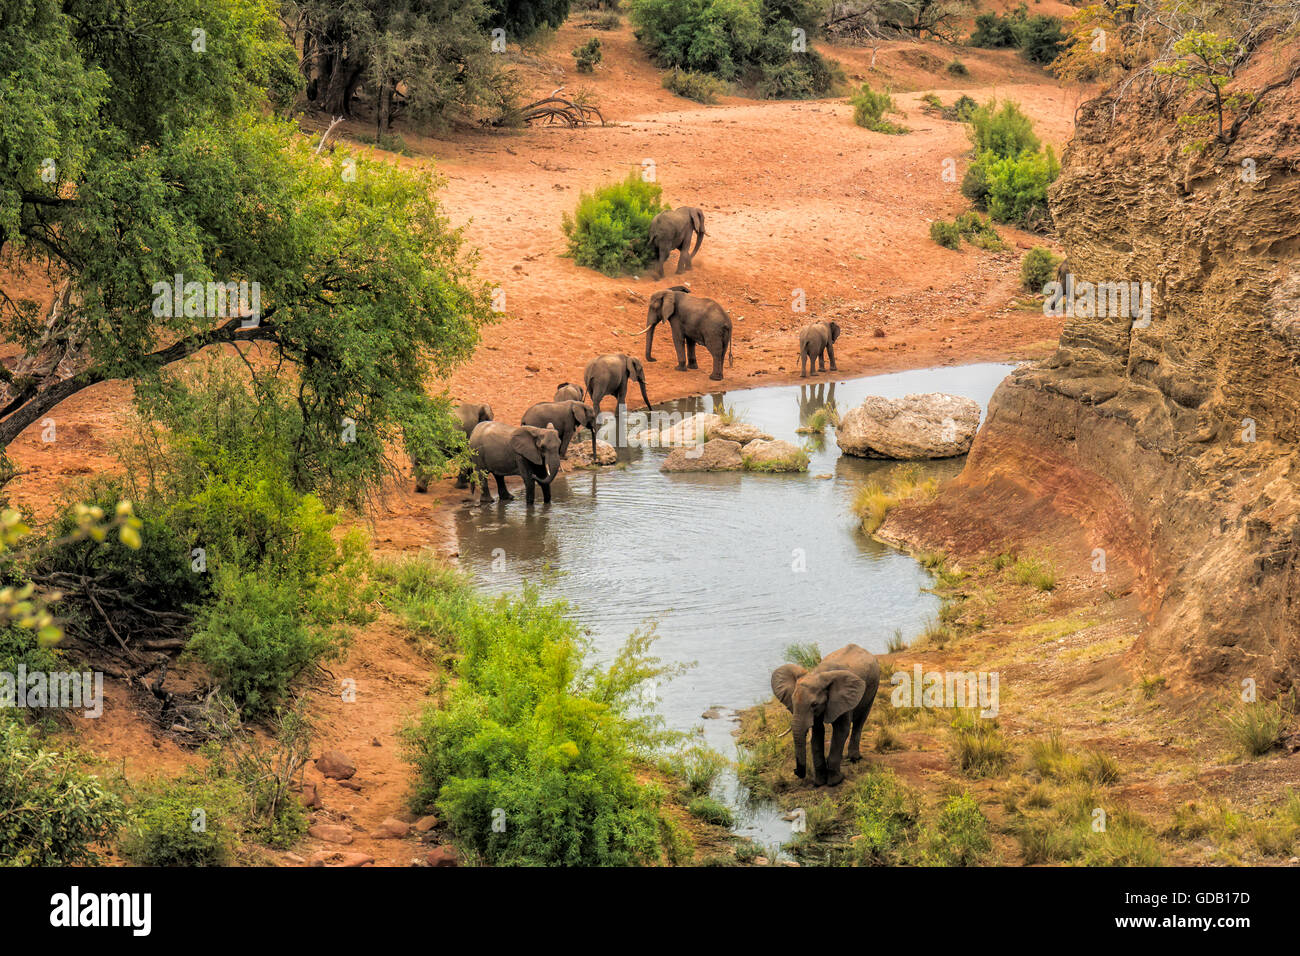 Elephants drinking water at the viewpoint Red Rock in the Kruger national park Stock Photo